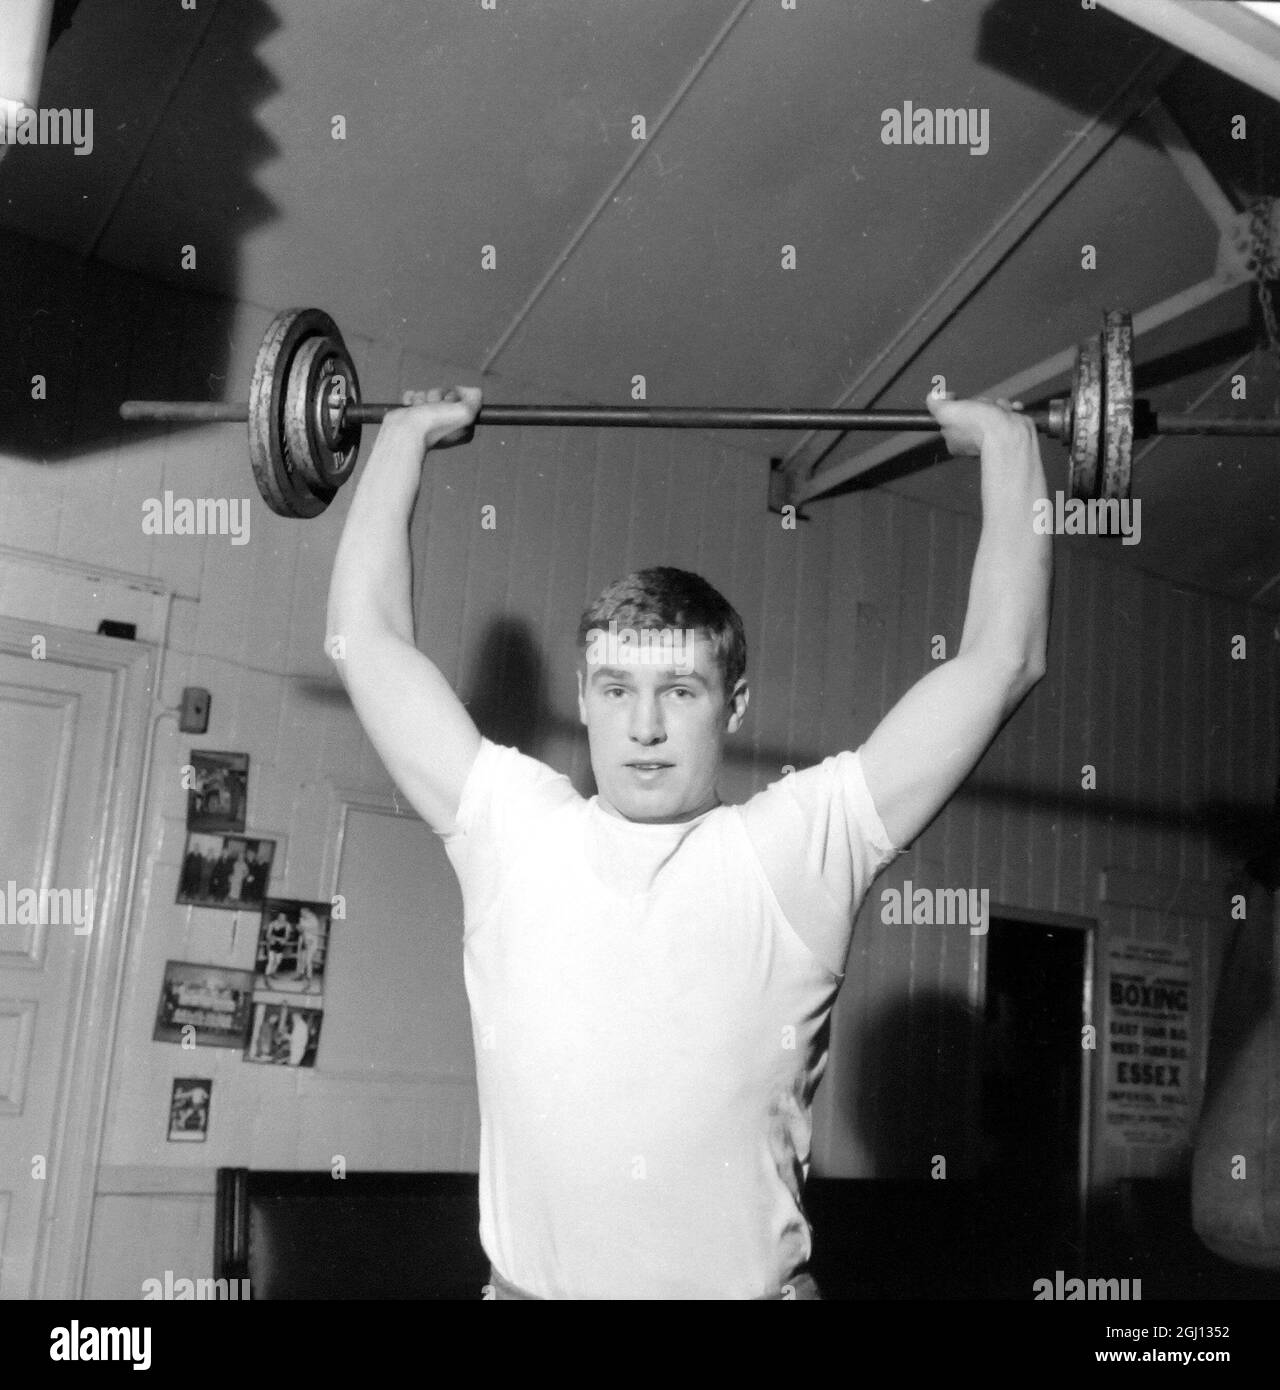 BOXING BILLY WALKER WEIGHT LIFTING DURING TRAINING 6 JANUARY 1962 Stock Photo